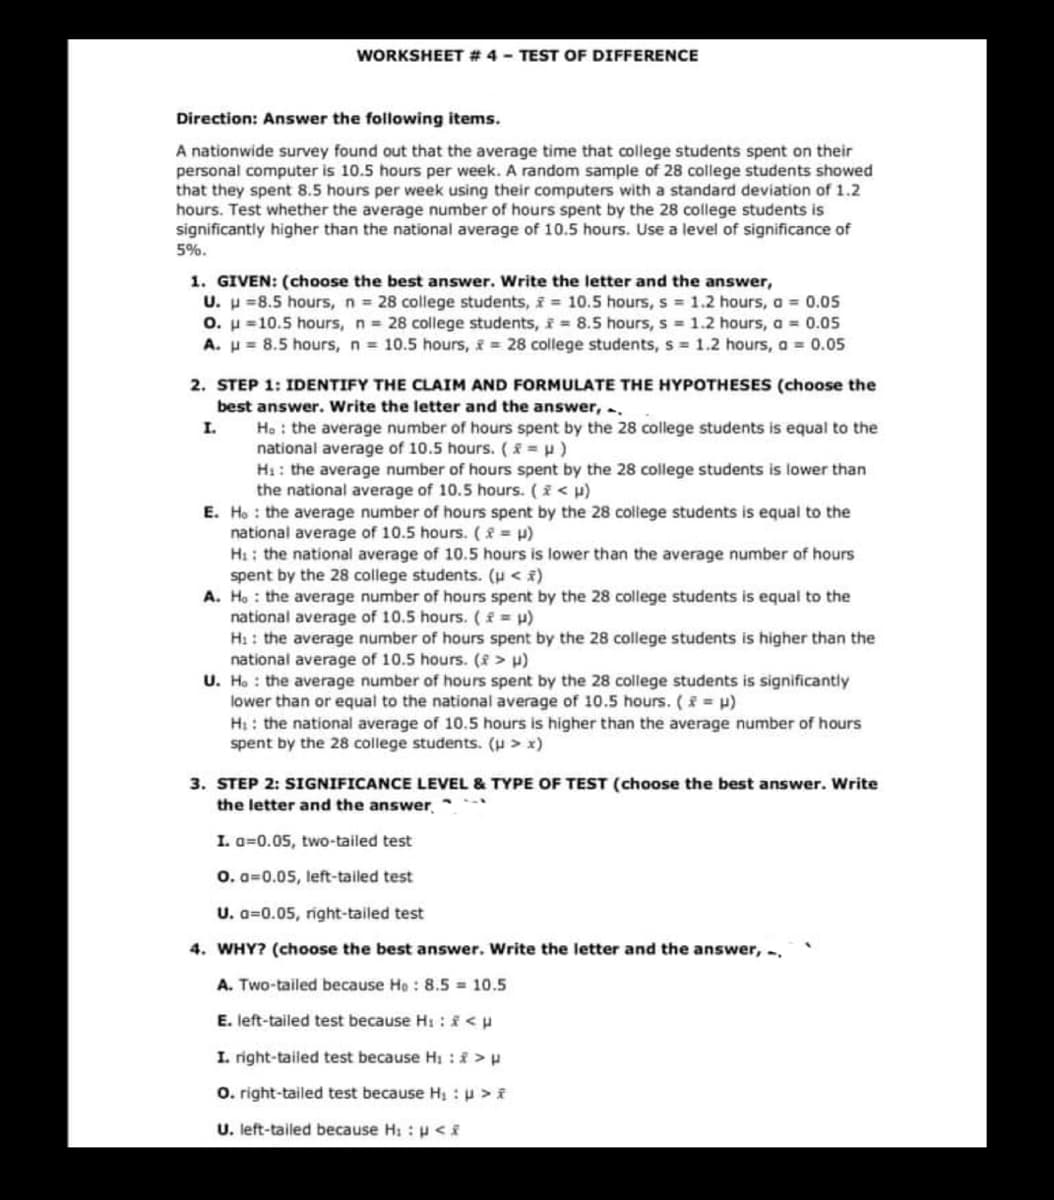 WORKSHEET # 4 - TEST OF DIFFERENCE
Direction: Answer the following items.
A nationwide survey found out that the average time that college students spent on their
personal computer is 10.5 hours per week. A random sample of 28 college students showed
that they spent 8.5 hours per week using their computers with a standard deviation of 1.2
hours. Test whether the average number of hours spent by the 28 college students is
significantly higher than the national average of 10.5 hours. Use a level of significance of
5%.
1. GIVEN: (choose the best answer. Write the letter and the answer,
U. =8.5 hours, n = 28 college students, = 10.5 hours, s = 1.2 hours, a = 0.05
O. μ =10.5 hours, n = 28 college students, f = 8.5 hours, s = 1.2 hours, a = 0.05
A. = 8.5 hours, n = 10.5 hours, = 28 college students, s= 1.2 hours, a = 0.05
2. STEP 1: IDENTIFY THE CLAIM AND FORMULATE THE HYPOTHESES (choose the
best answer. Write the letter and the answer, ..
I.
Ho the average number of hours spent by the 28 college students is equal to the
national average of 10.5 hours. (x = μ)
H₁: the average number of hours spent by the 28 college students is lower than
the national average of 10.5 hours. ( * < μ)
E. Ho the average number of hours spent by the 28 college students is equal to the
national average of 10.5 hours. (= H)
H:: the national average of 10.5 hours is lower than the average number of hours
spent by the 28 college students. (μ< *)
A. Ho the average number of hours spent by the 28 college students is equal to the
national average of 10.5 hours. (x = μ)
H₁: the average number of hours spent by the 28 college students is higher than the
national average of 10.5 hours. (8 > μ)
U. Ho the average number of hours spent by the 28 college students is significantly
lower than or equal to the national average of 10.5 hours. (* = µ)
H:: the national average of 10.5 hours is higher than the average number of hours
spent by the 28 college students. (μ > x)
3. STEP 2: SIGNIFICANCE LEVEL & TYPE OF TEST (choose the best answer. Write
the letter and the answer,
I. a=0.05, two-tailed test
0.0 0.05, left-tailed test
U. a 0.05, right-tailed test
4. WHY? (choose the best answer. Write the letter and the answer, -,
A. Two-tailed because He: 8.5 = 10.5
E. left-tailed test because H₁ : <u
I. right-tailed test because H₁ : * > p
O. right-tailed test because H₁ : p > f
U. left-tailed because H: :p <f